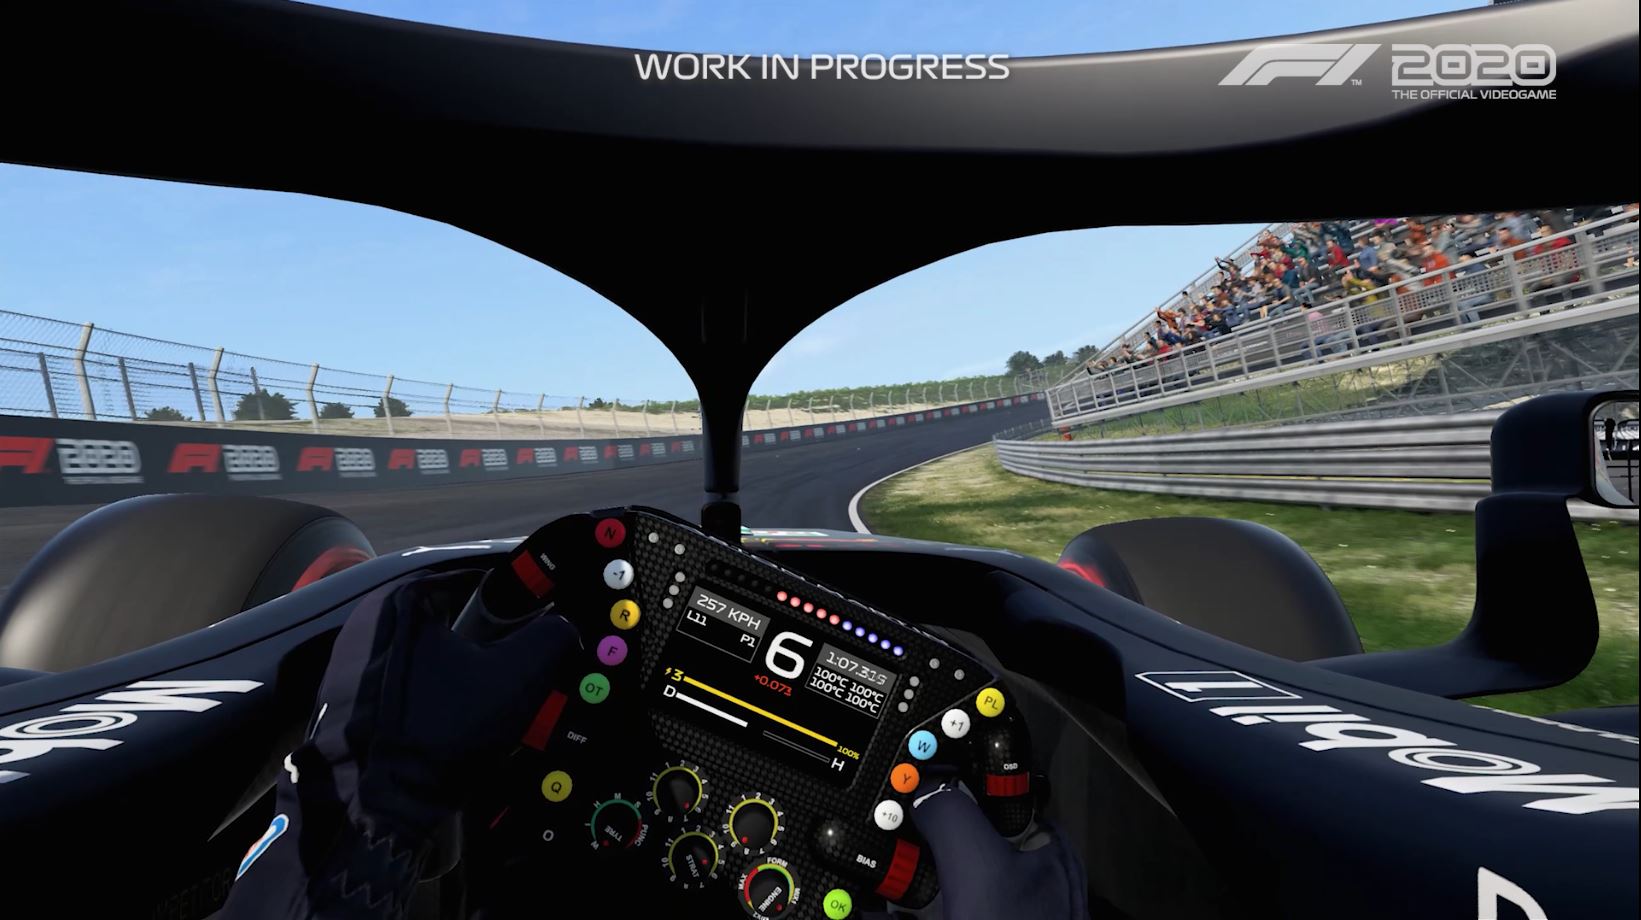 ps4 f1 game